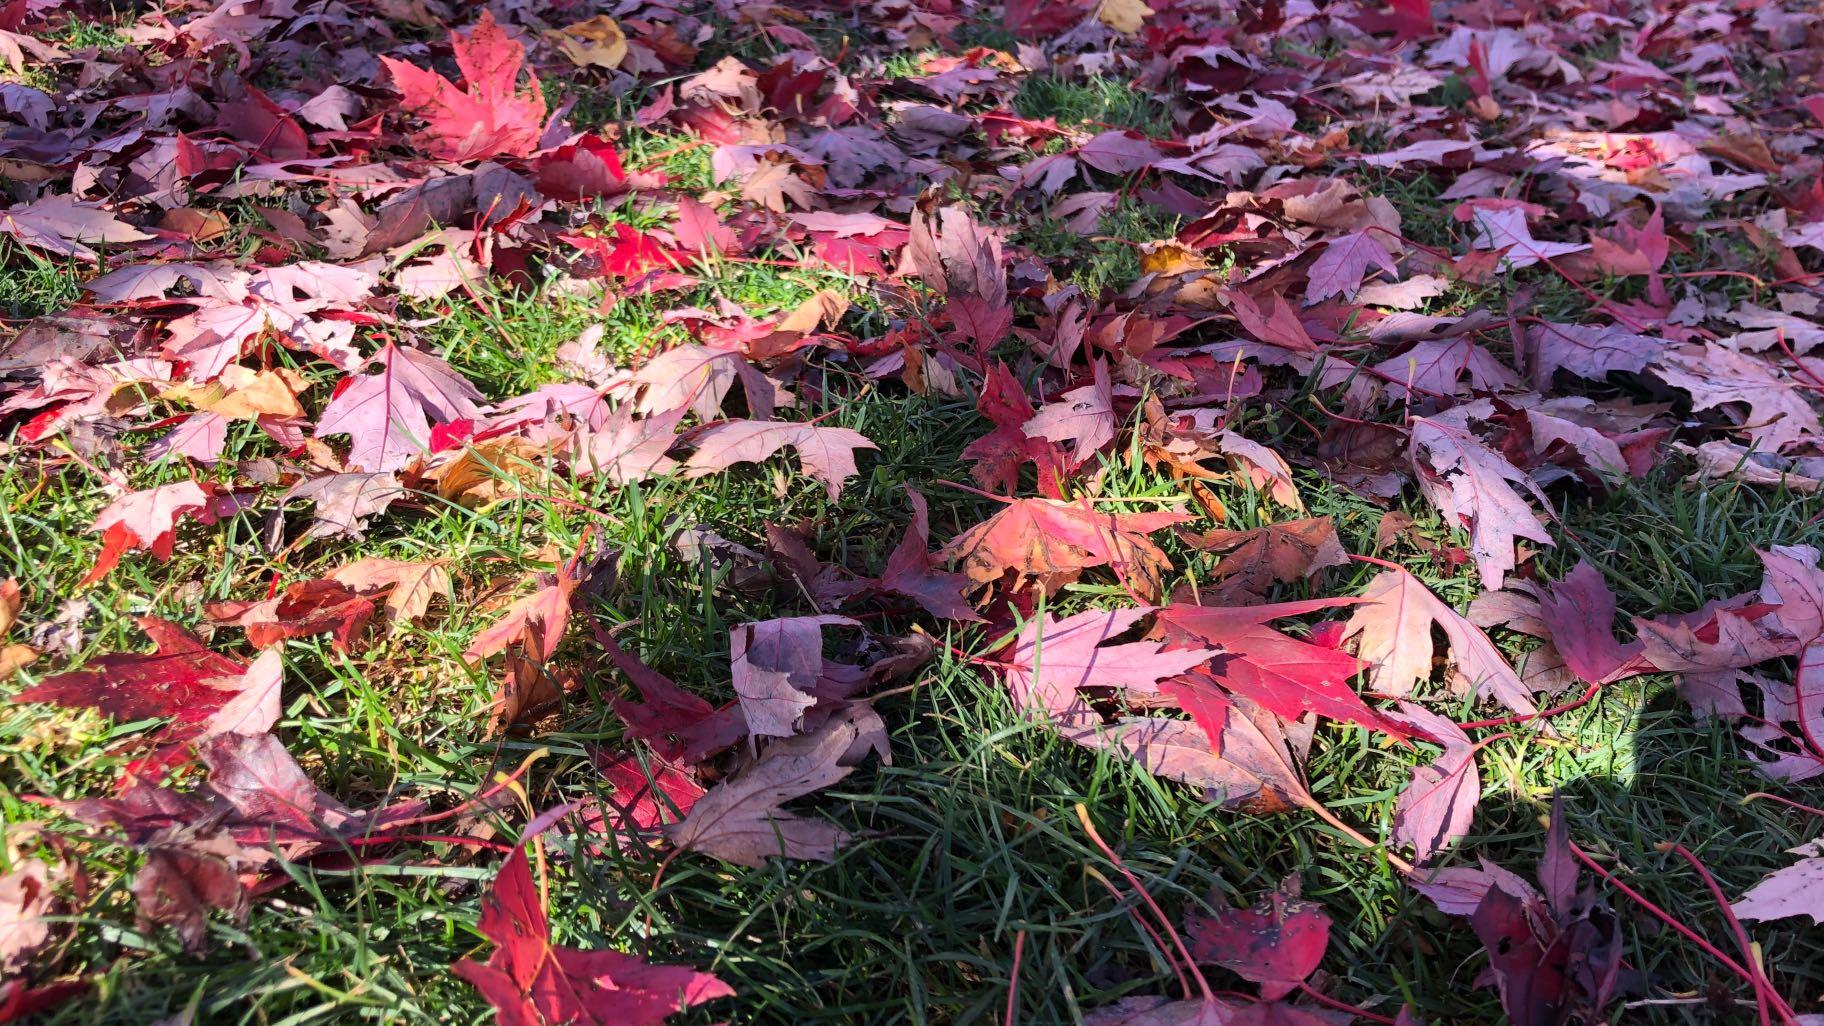 Leaves are an excellent source of nutrition for trees. Don't send this natural, and free, fertilizer to landfill, experts advise. (Patty Wetli / WTTW News)